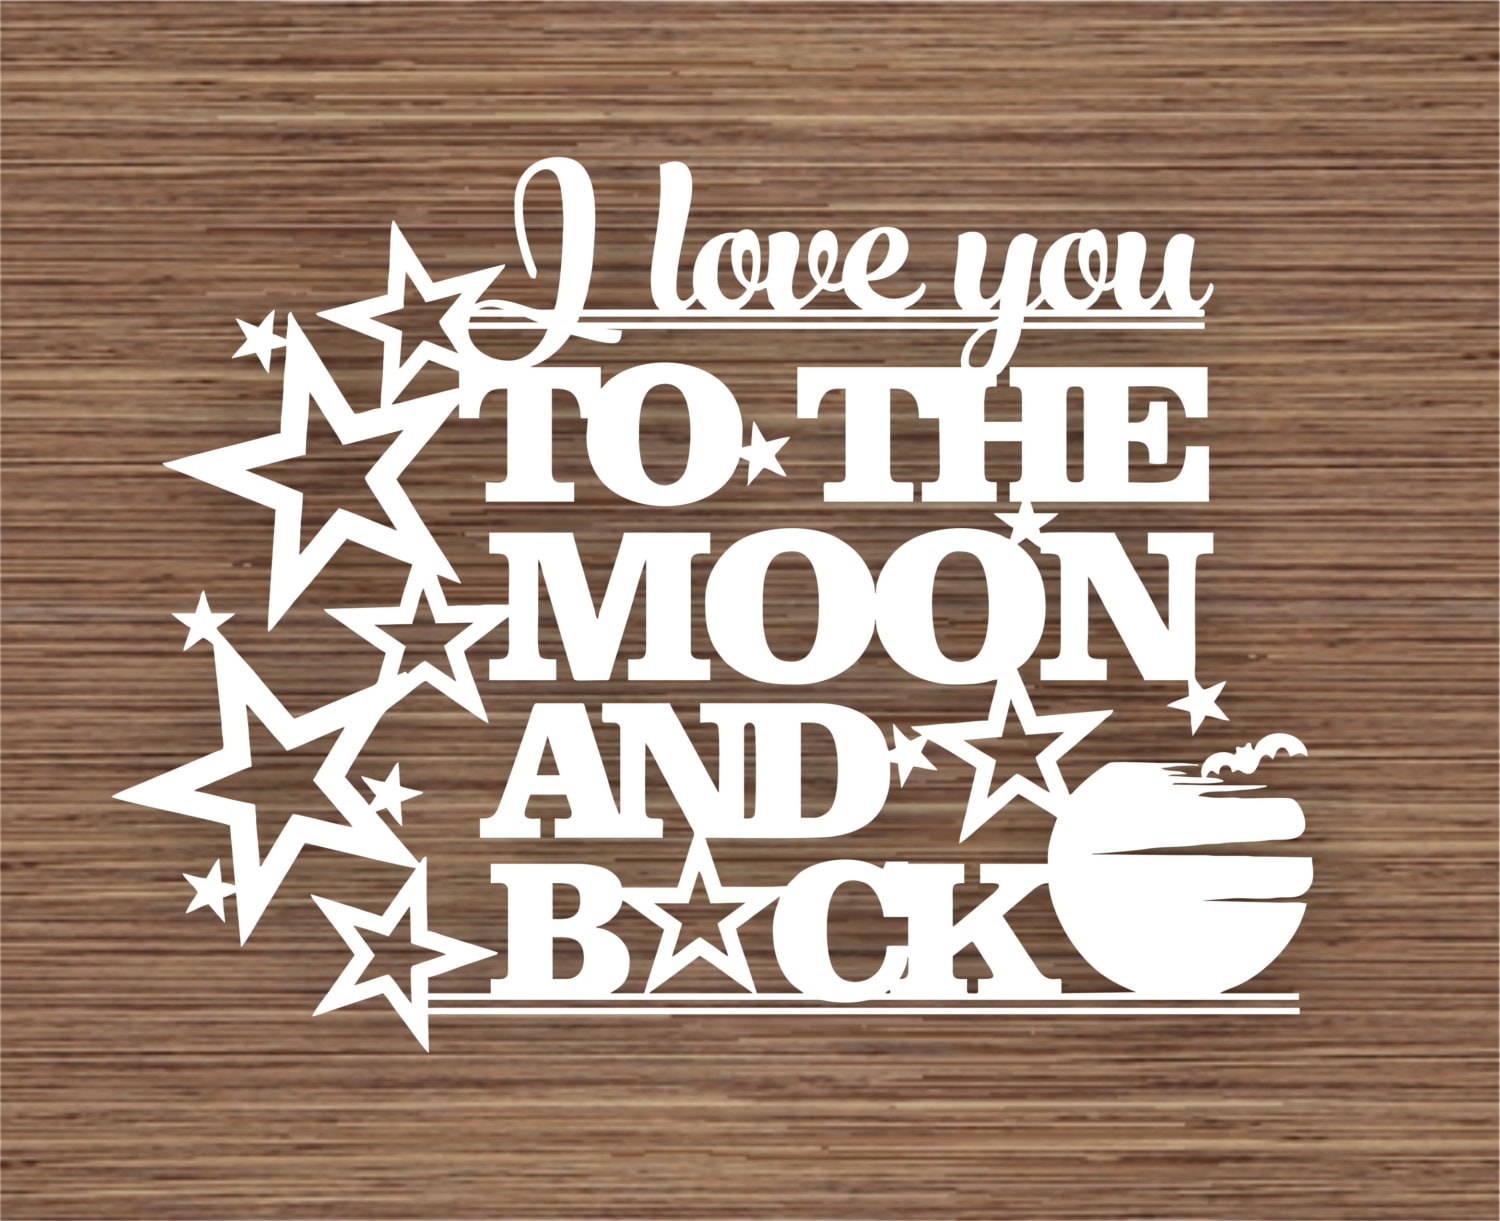 Download I love you to the moon and back PDF SVG Commercial Use